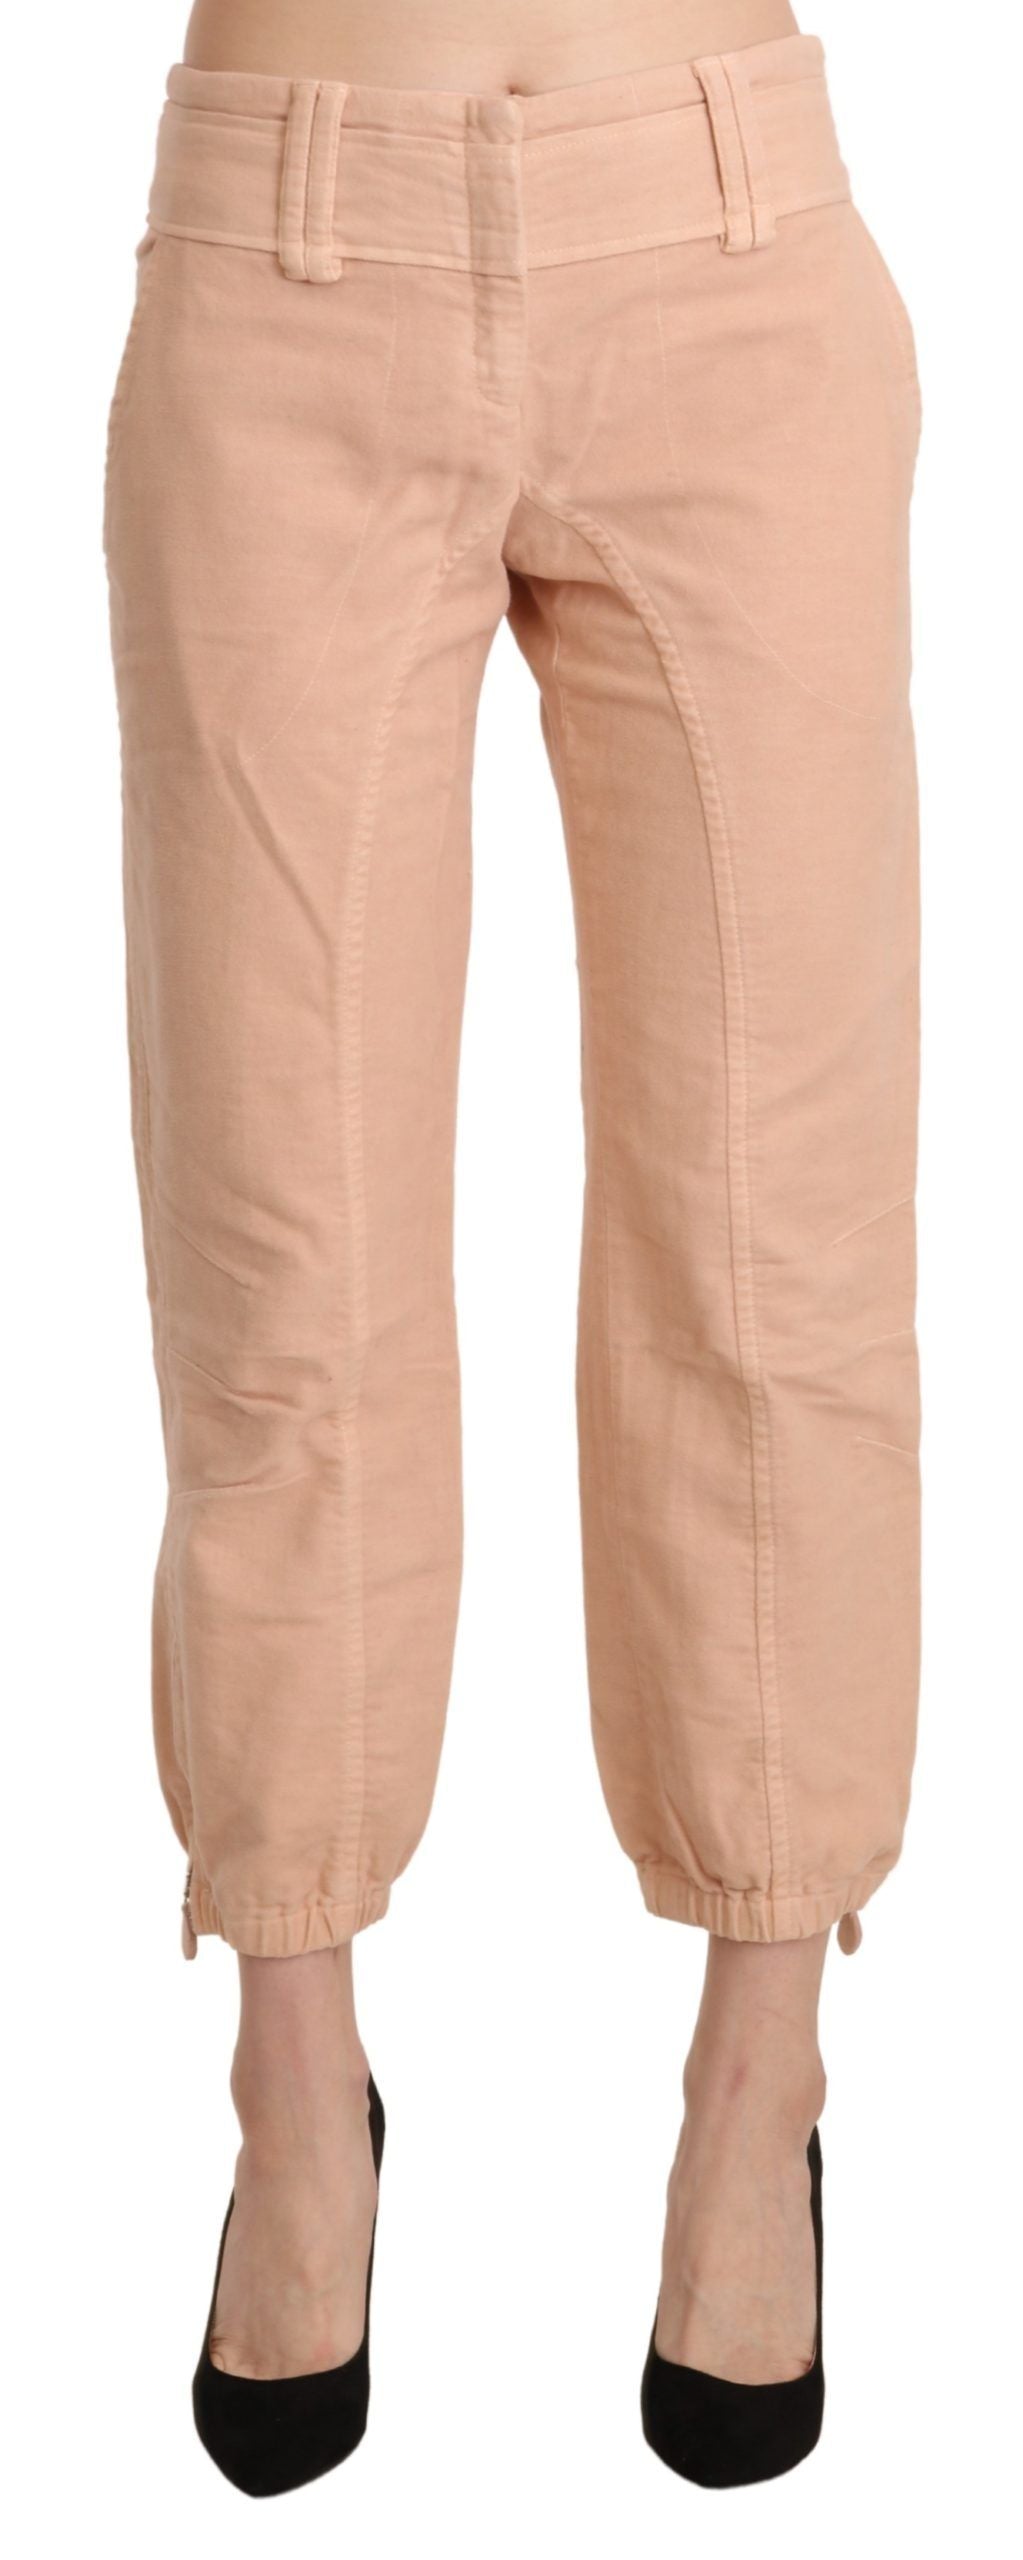 Chic Beige Cropped Cotton Pants